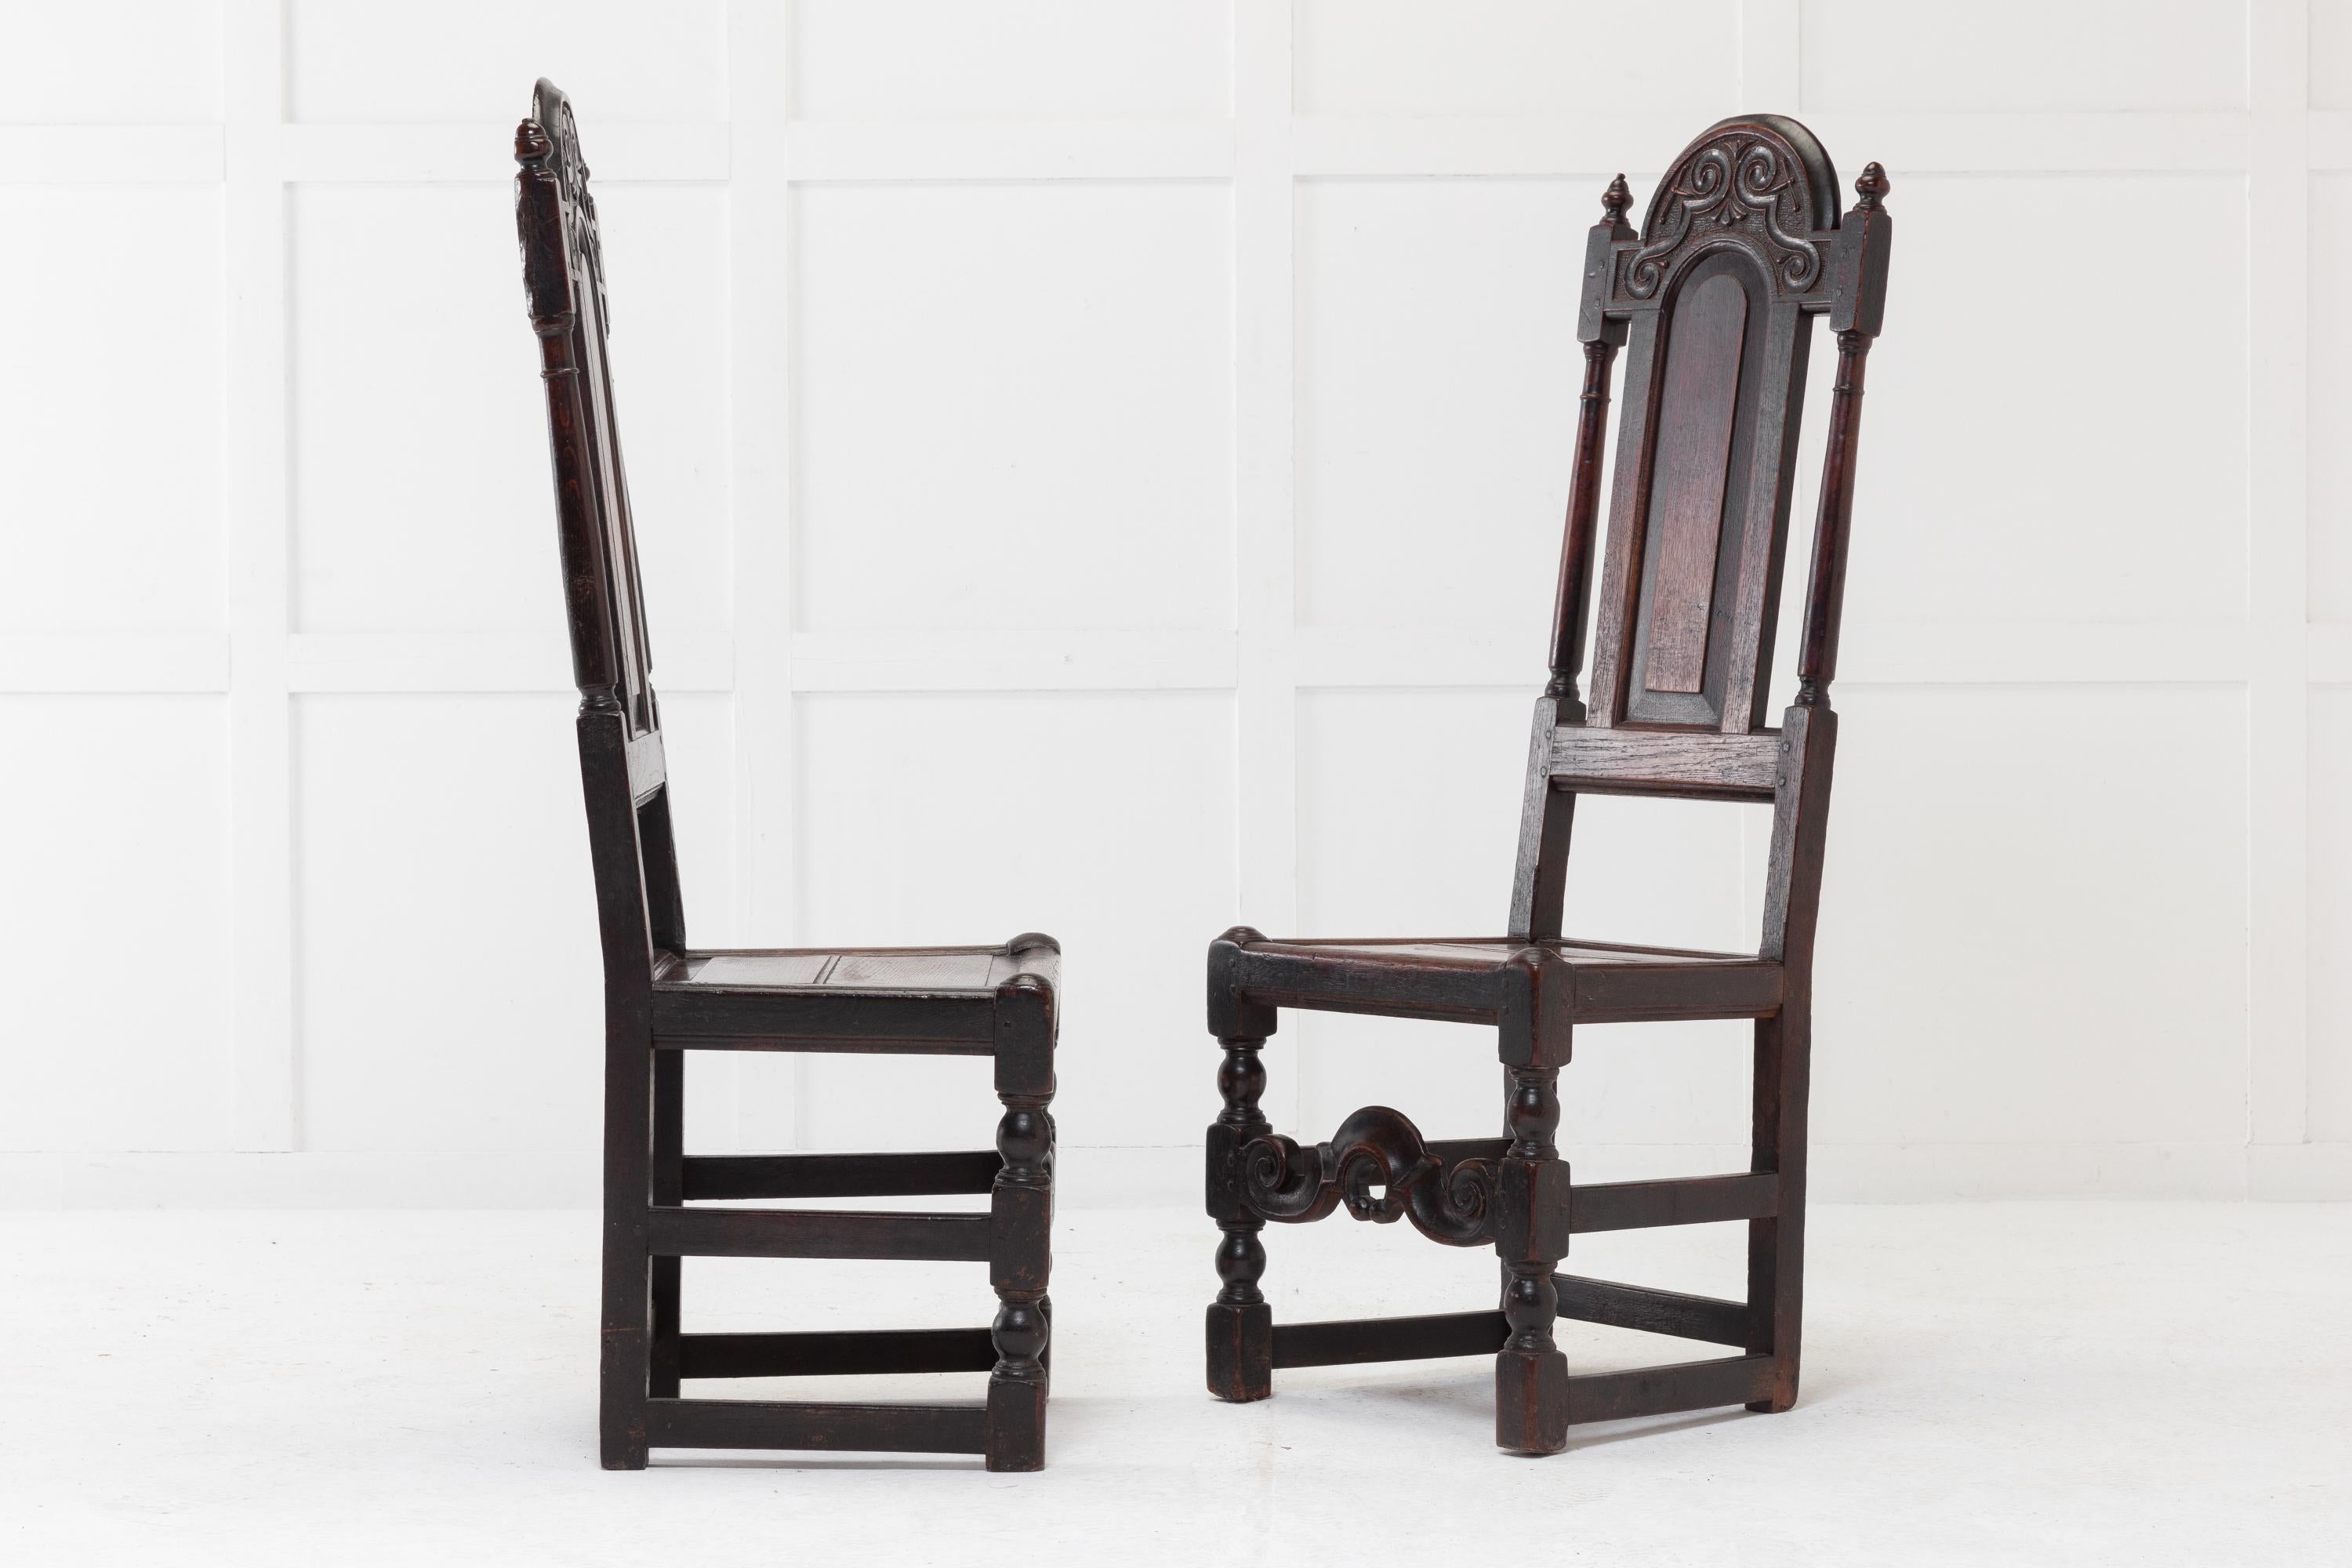 A rare pair of 17th century English oak side chairs having high backs, beautifully carved top rails and wide panelled back splats flanked by turned supports with finials. Original solid wooden seats made of two moulded panels. Traditional stretchers